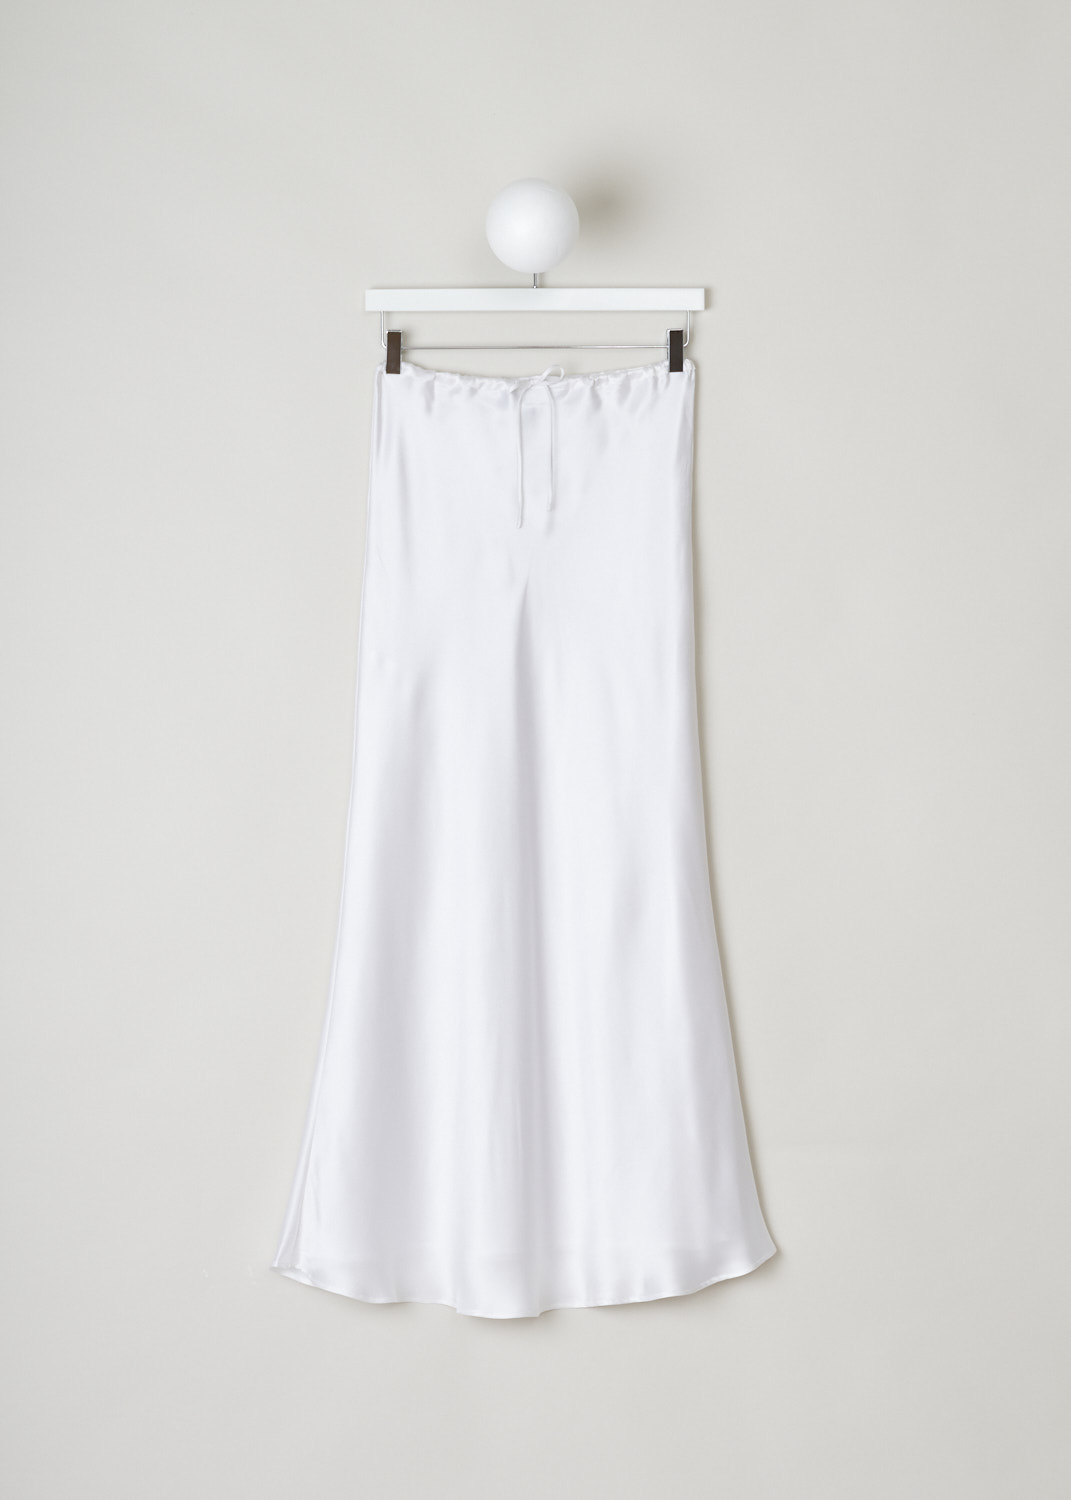 Bernadette, White satin skirt with drawstring fastening, skirt_emily_silk_satin_natural_white, white, front, A gorgeous white satin skirt deserves to be a part of your daily basics, would fit amazing with any top you throw at it or shoe under it. Designed in a flaring model, what stands out here is the fastening option, being a drawstring on the front.

